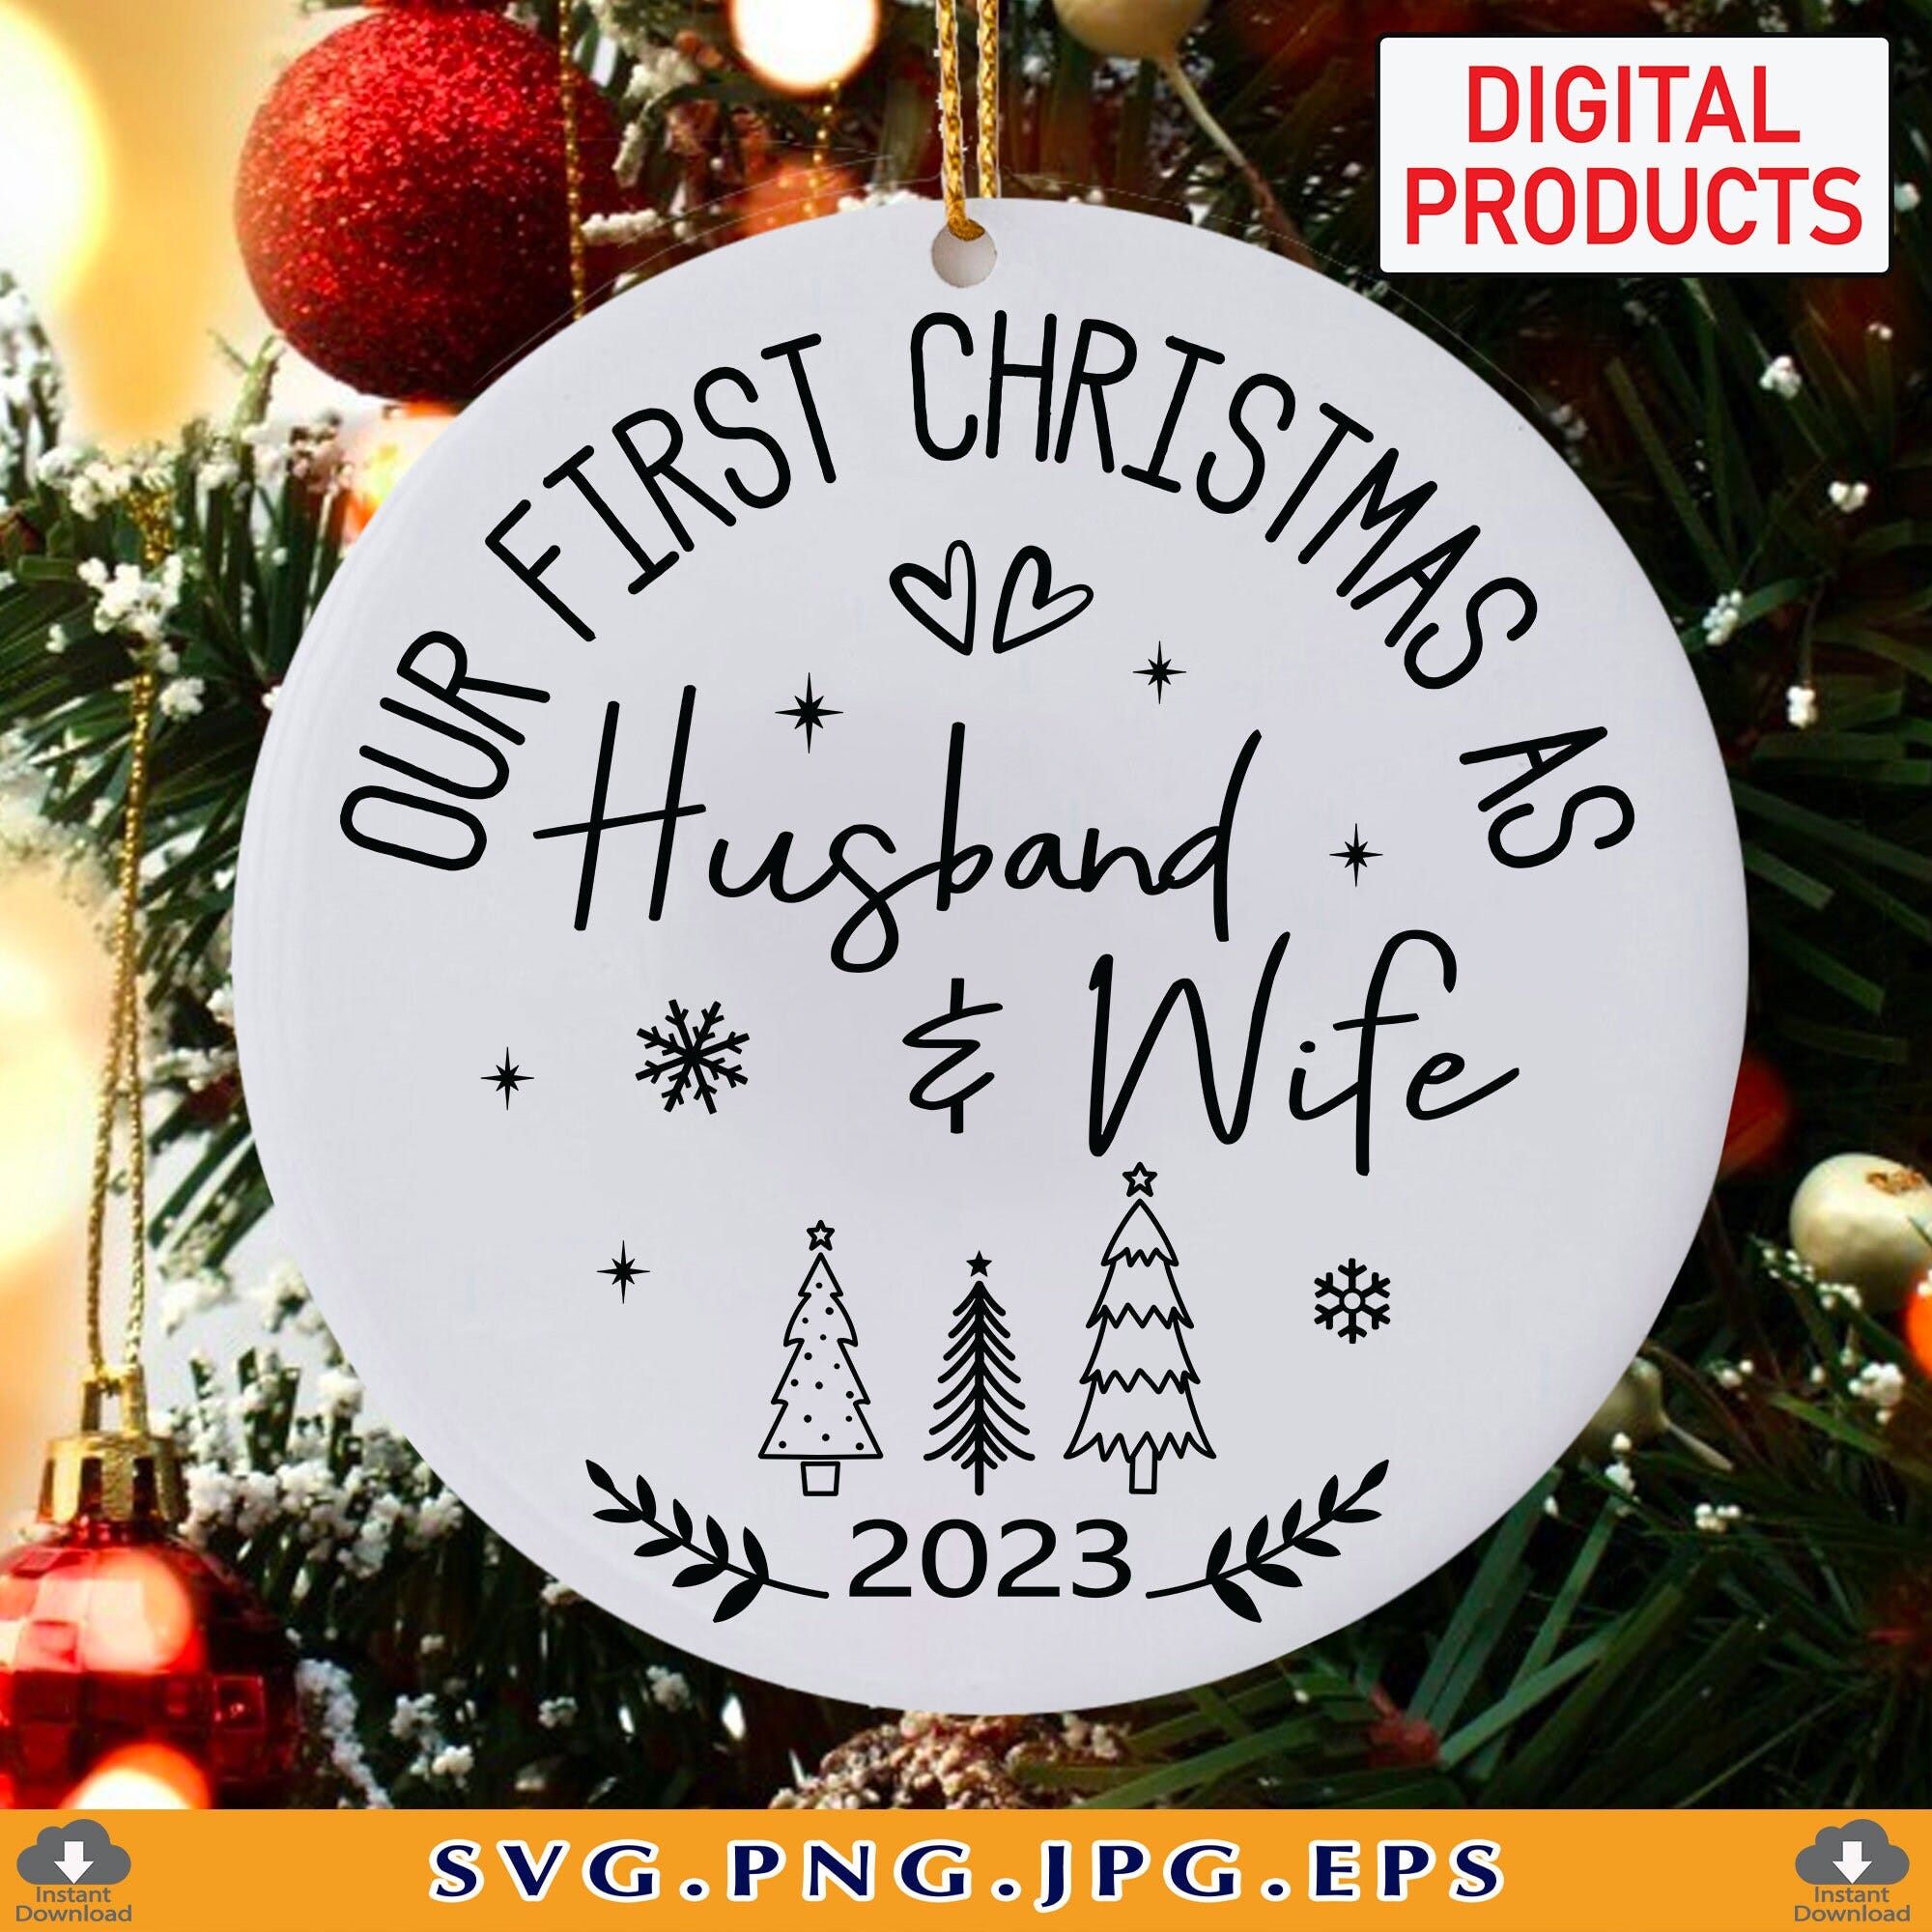 Our First Christmas As Husband & Wife, 2023 Christmas Ornament SVG, Couples Christmas Gift SVG, Xmas Wedding, Cut Files For Cricut, Svg, PNG